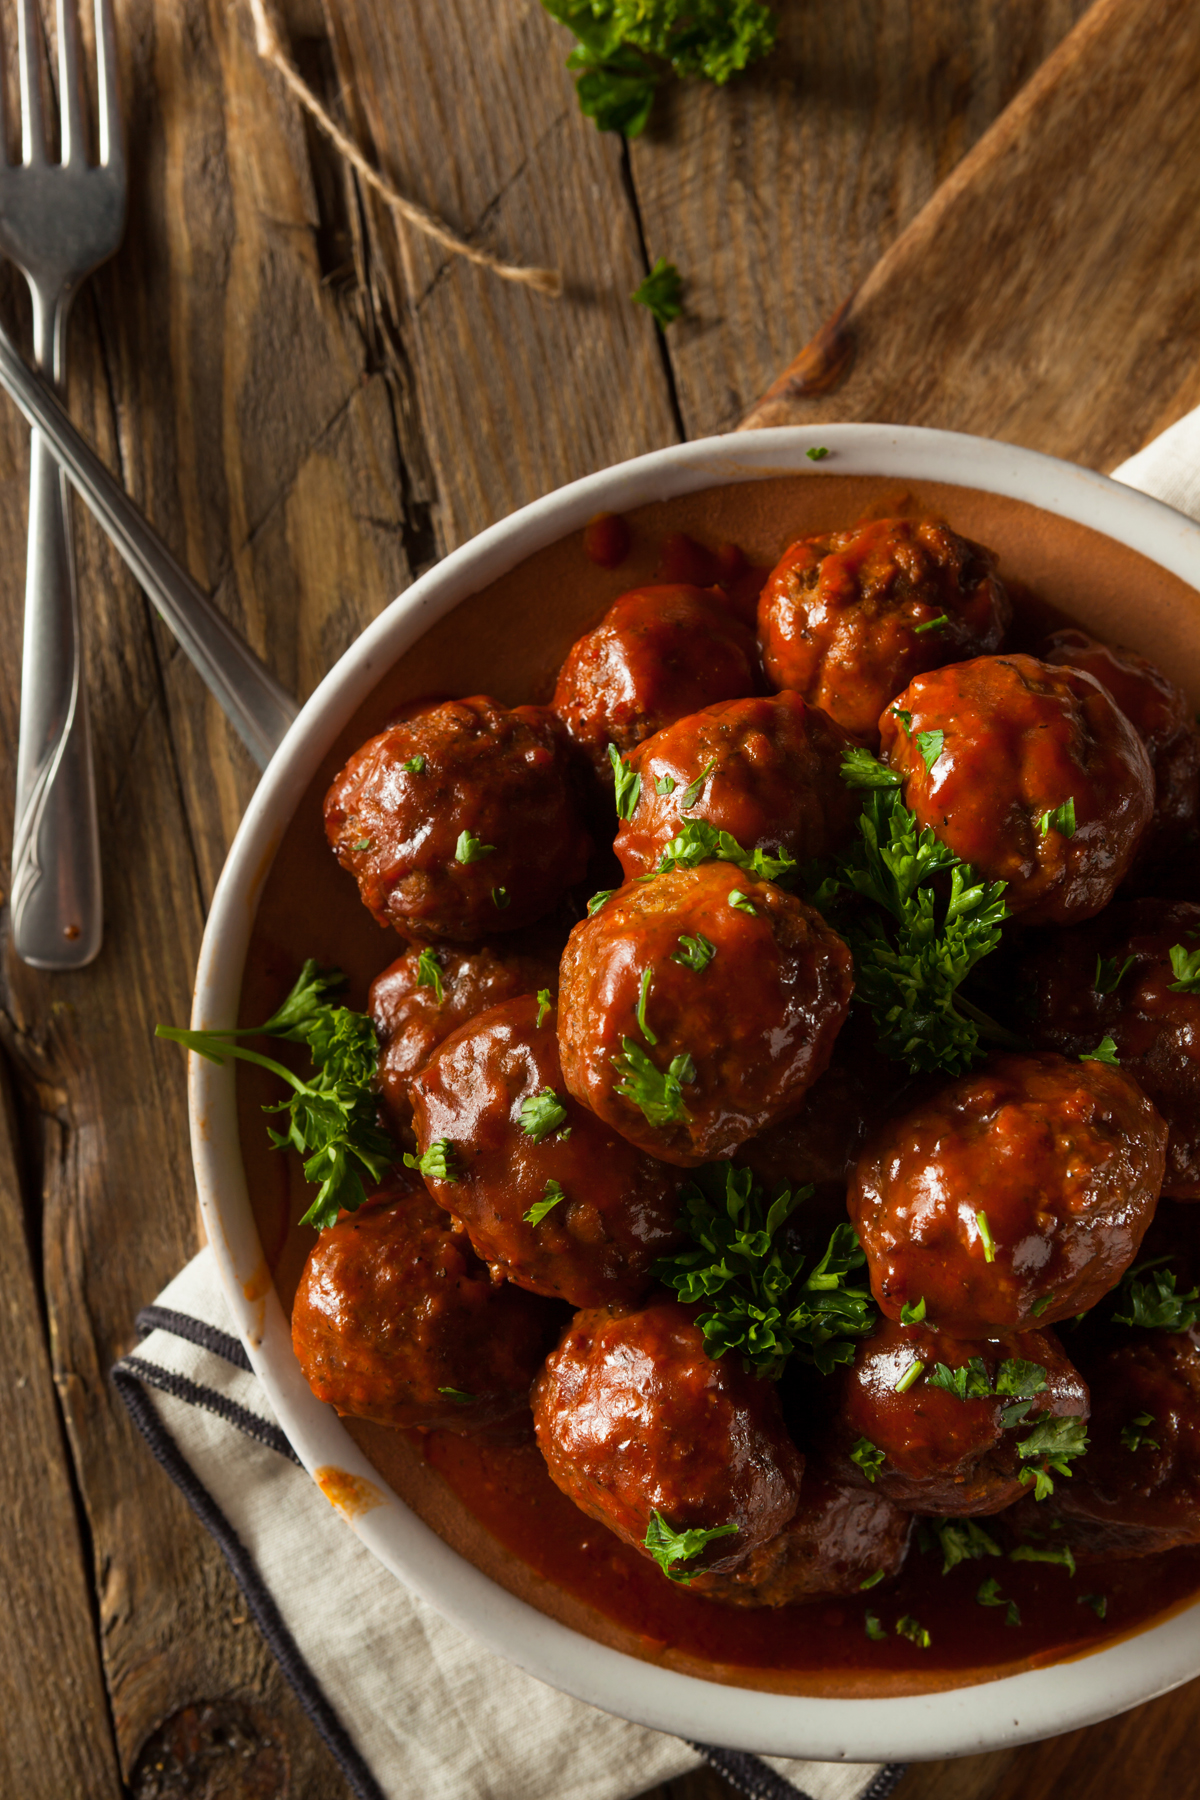 What To Serve With BBQ Meatballs